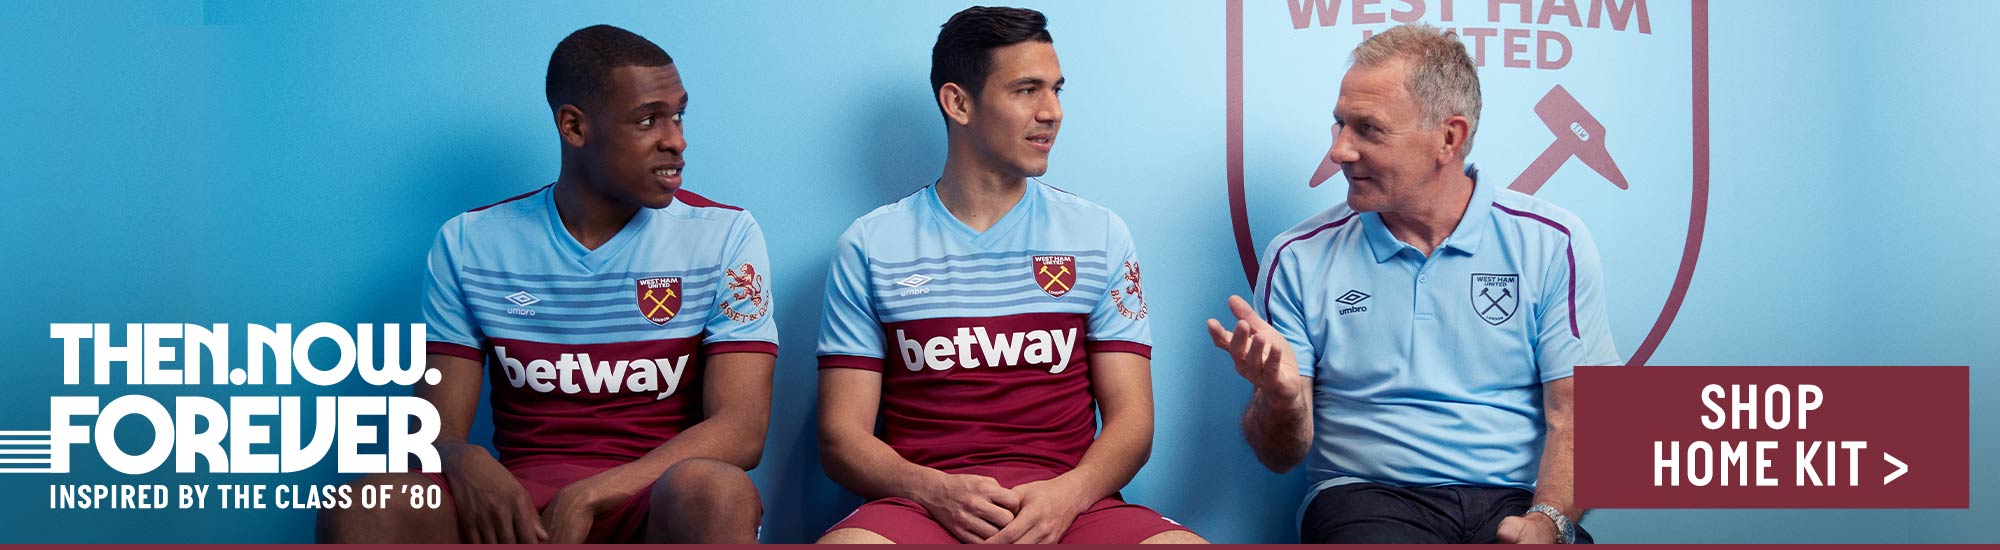 Buy home kit from the West Ham store